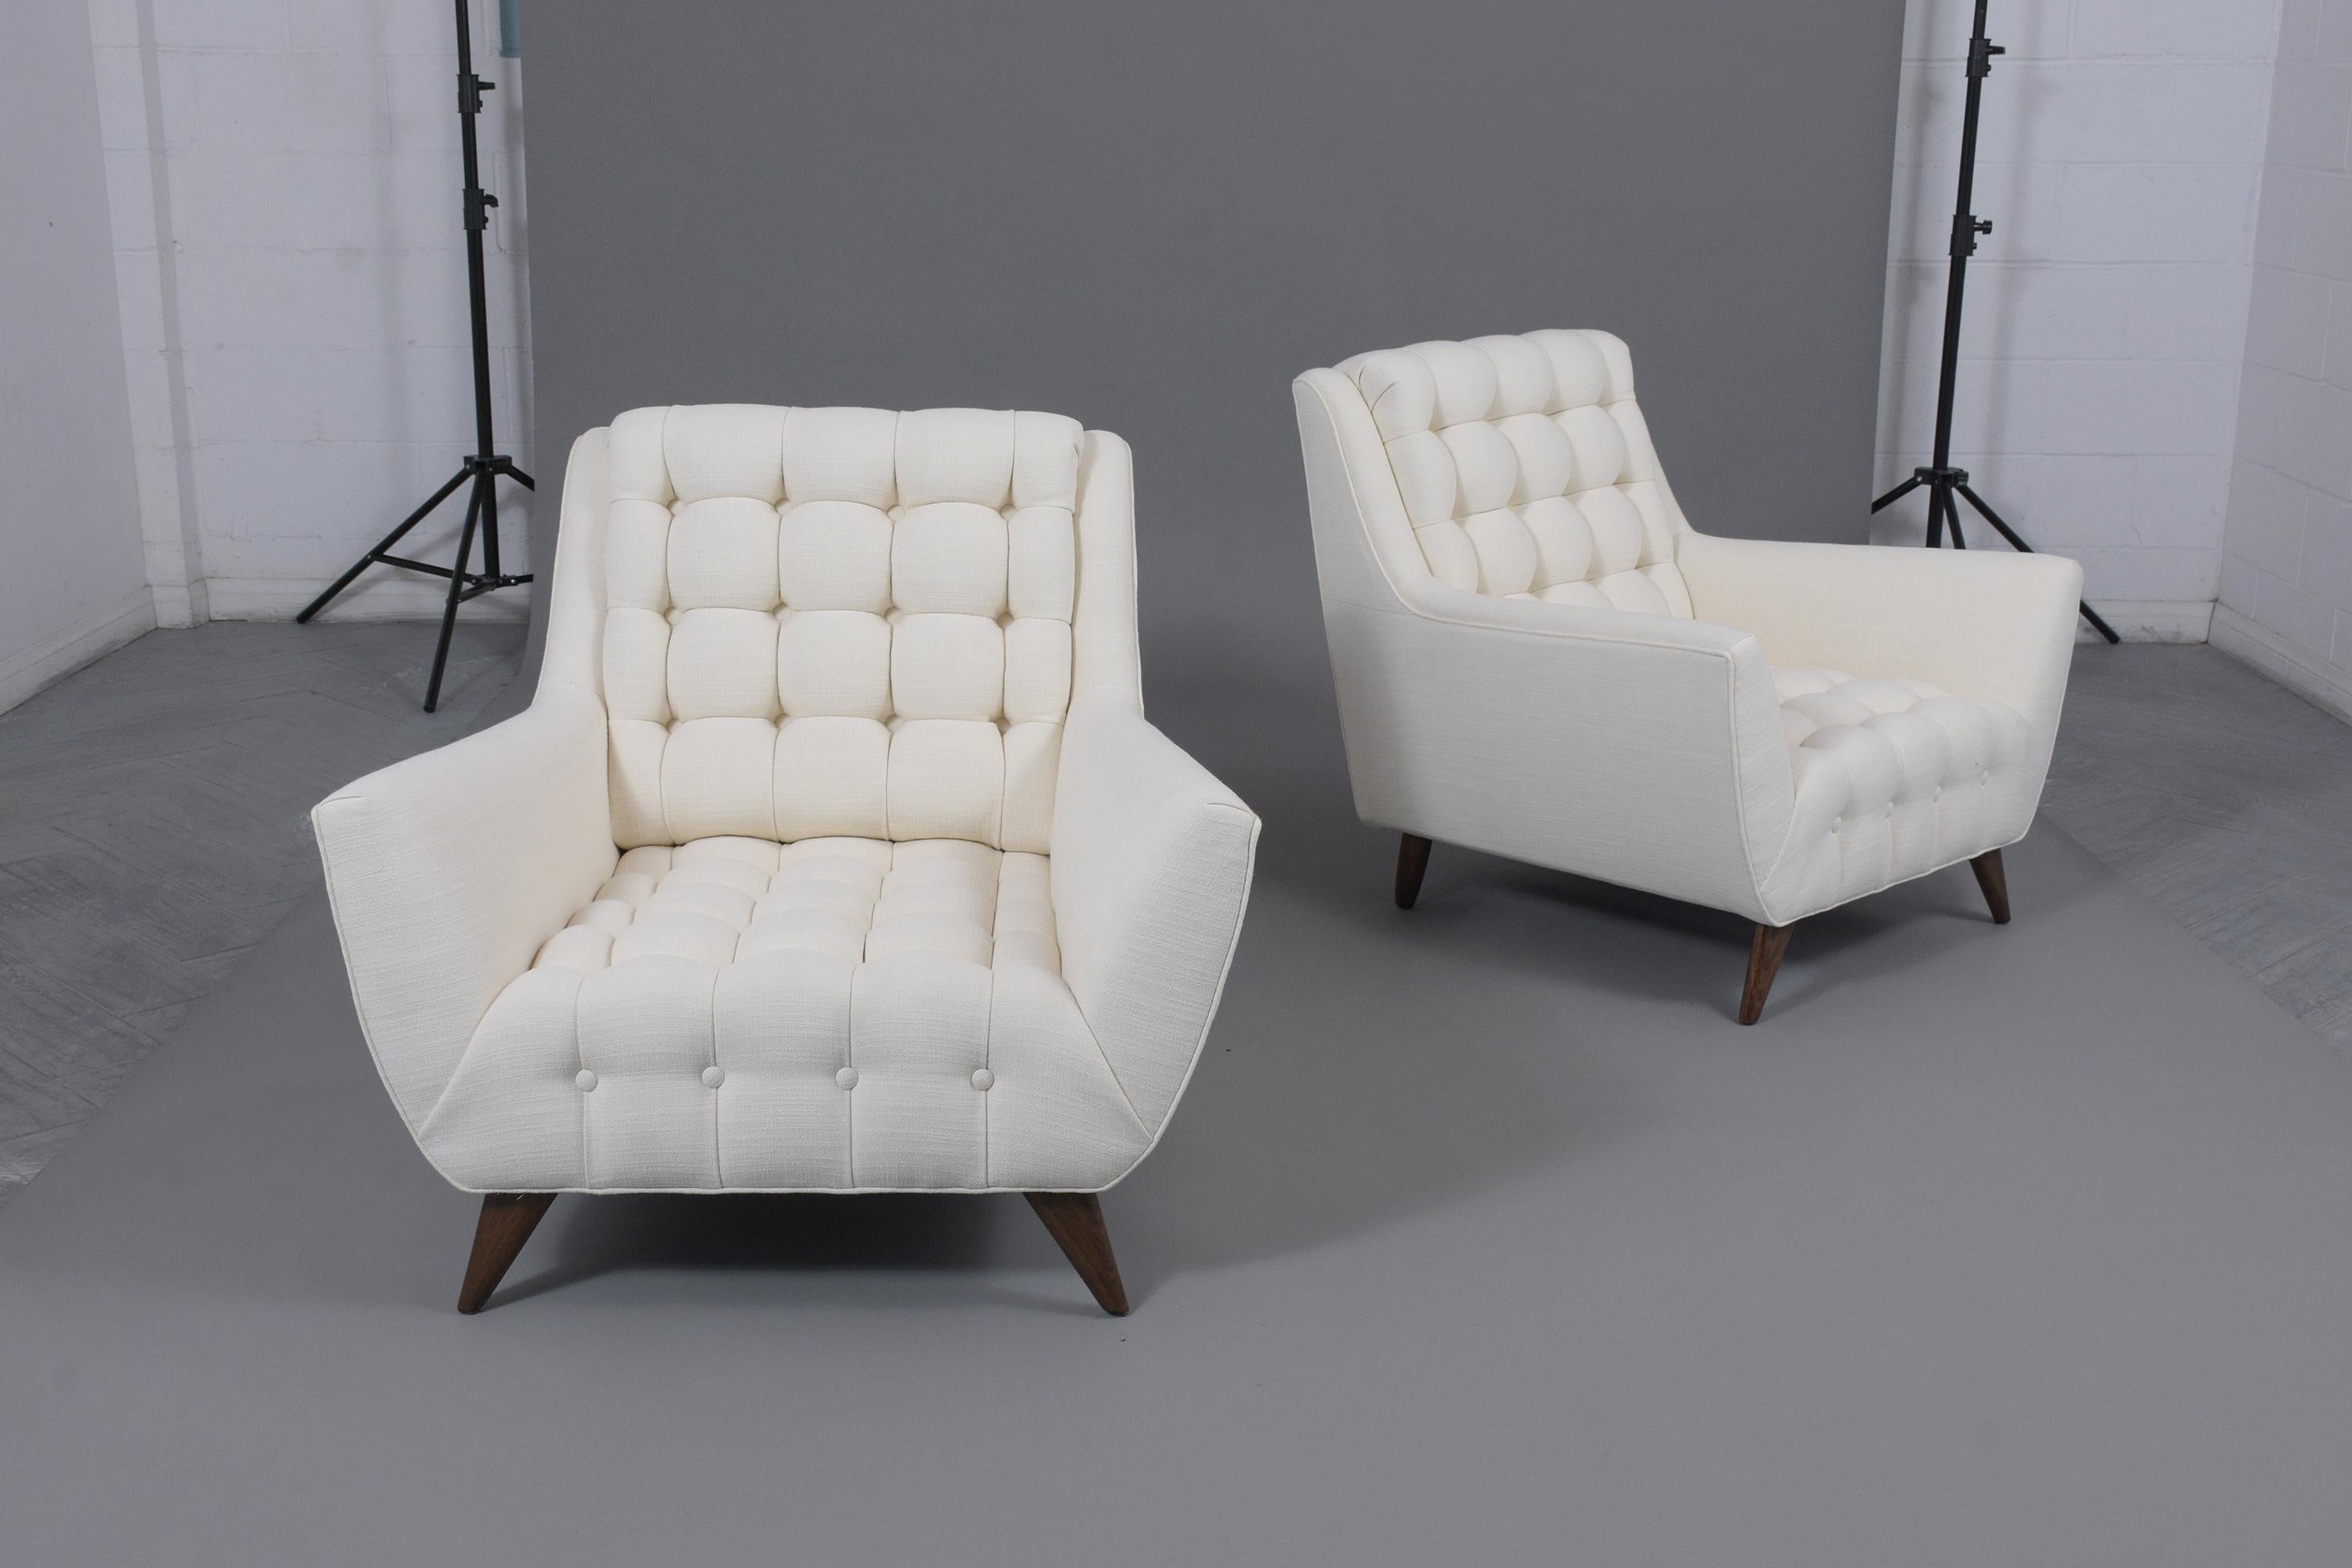 Mid-20th Century Restored Adrian Pearsall-Style Mid-Century Modern Lounge Chairs in Oyster Fabric